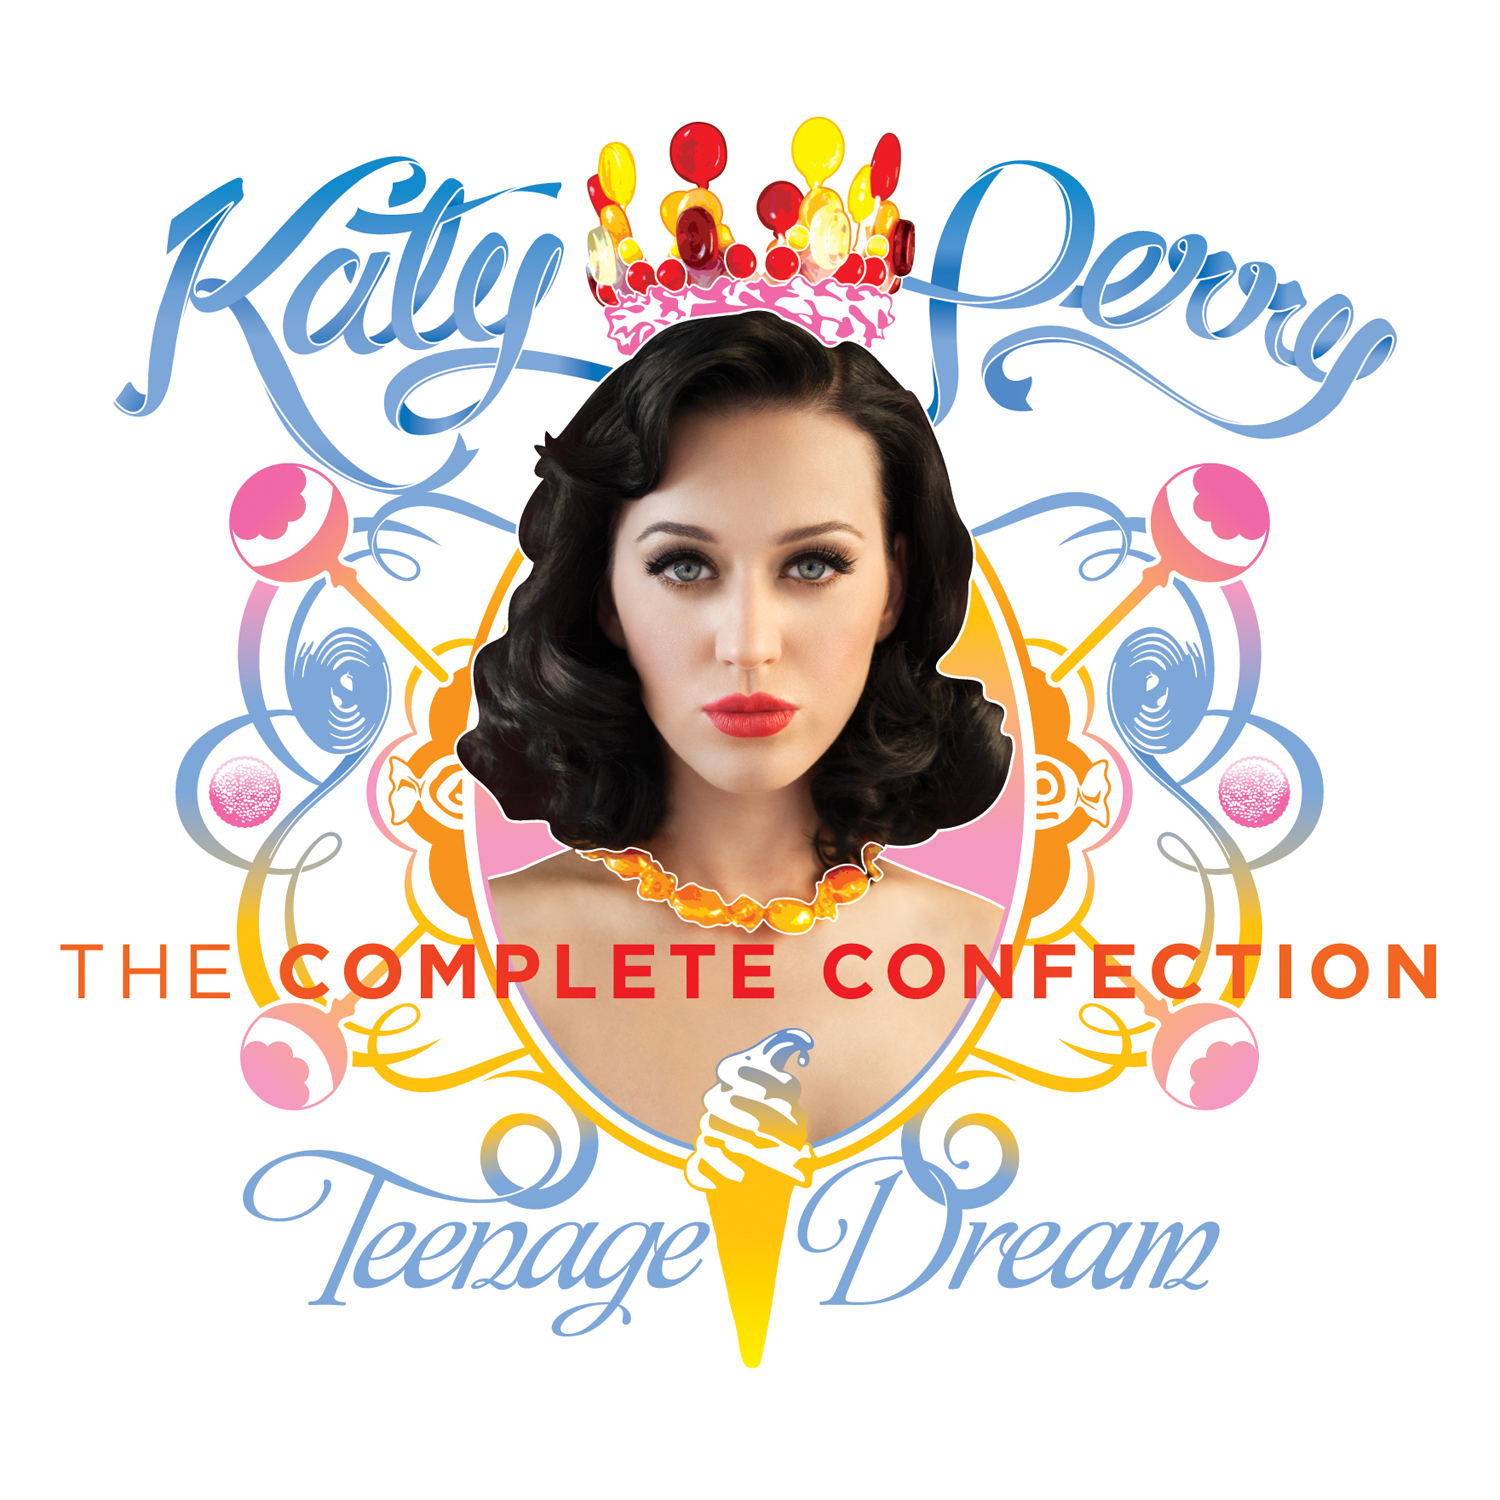 TEENAGE DREAM: THE COMPLETE CONFECTION